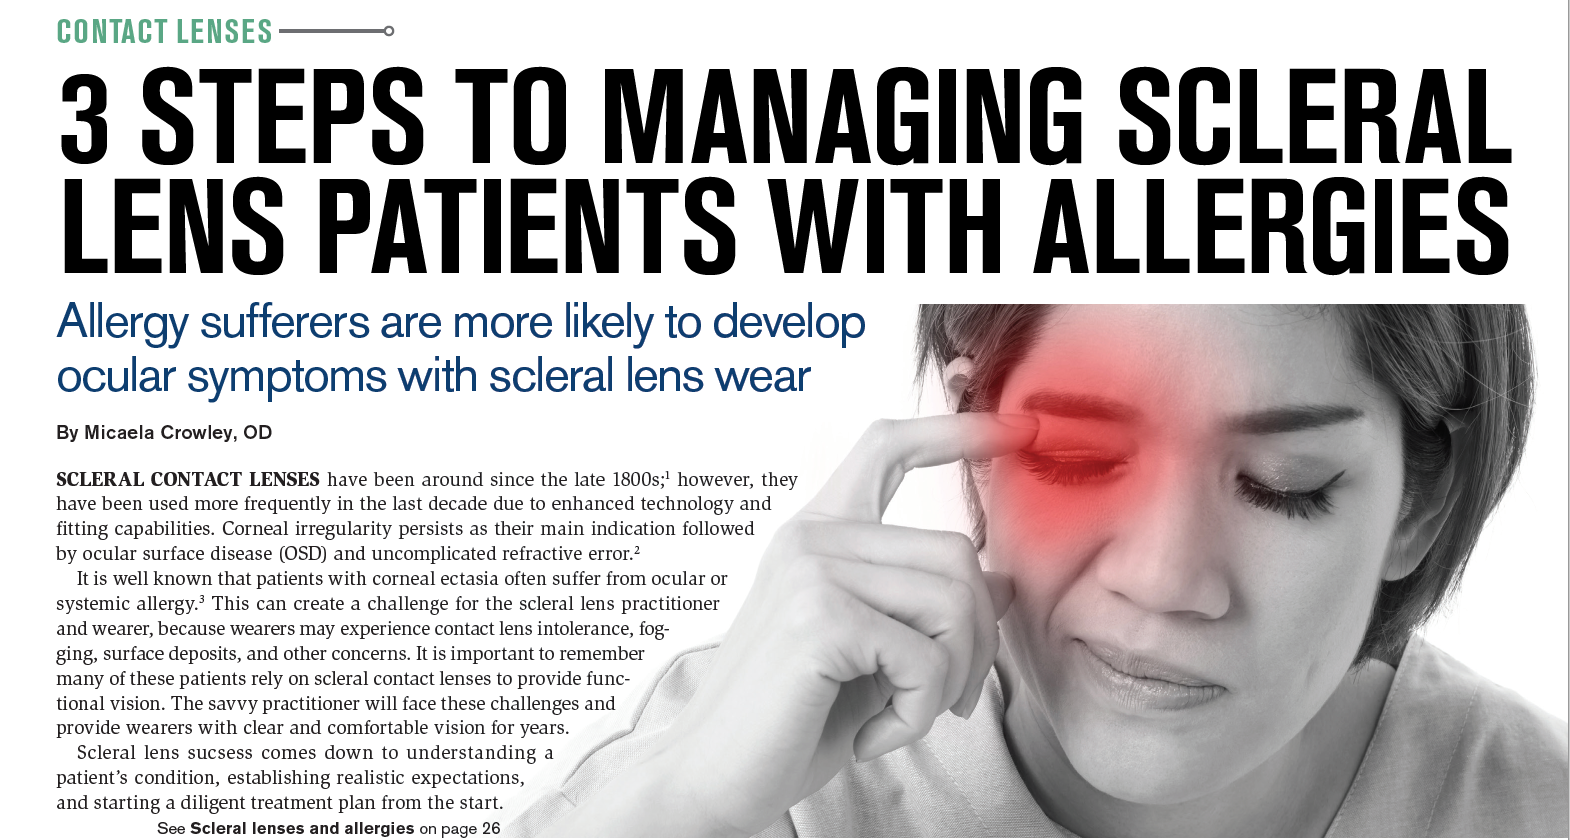 3 steps to managing scleral lens patients with allergies